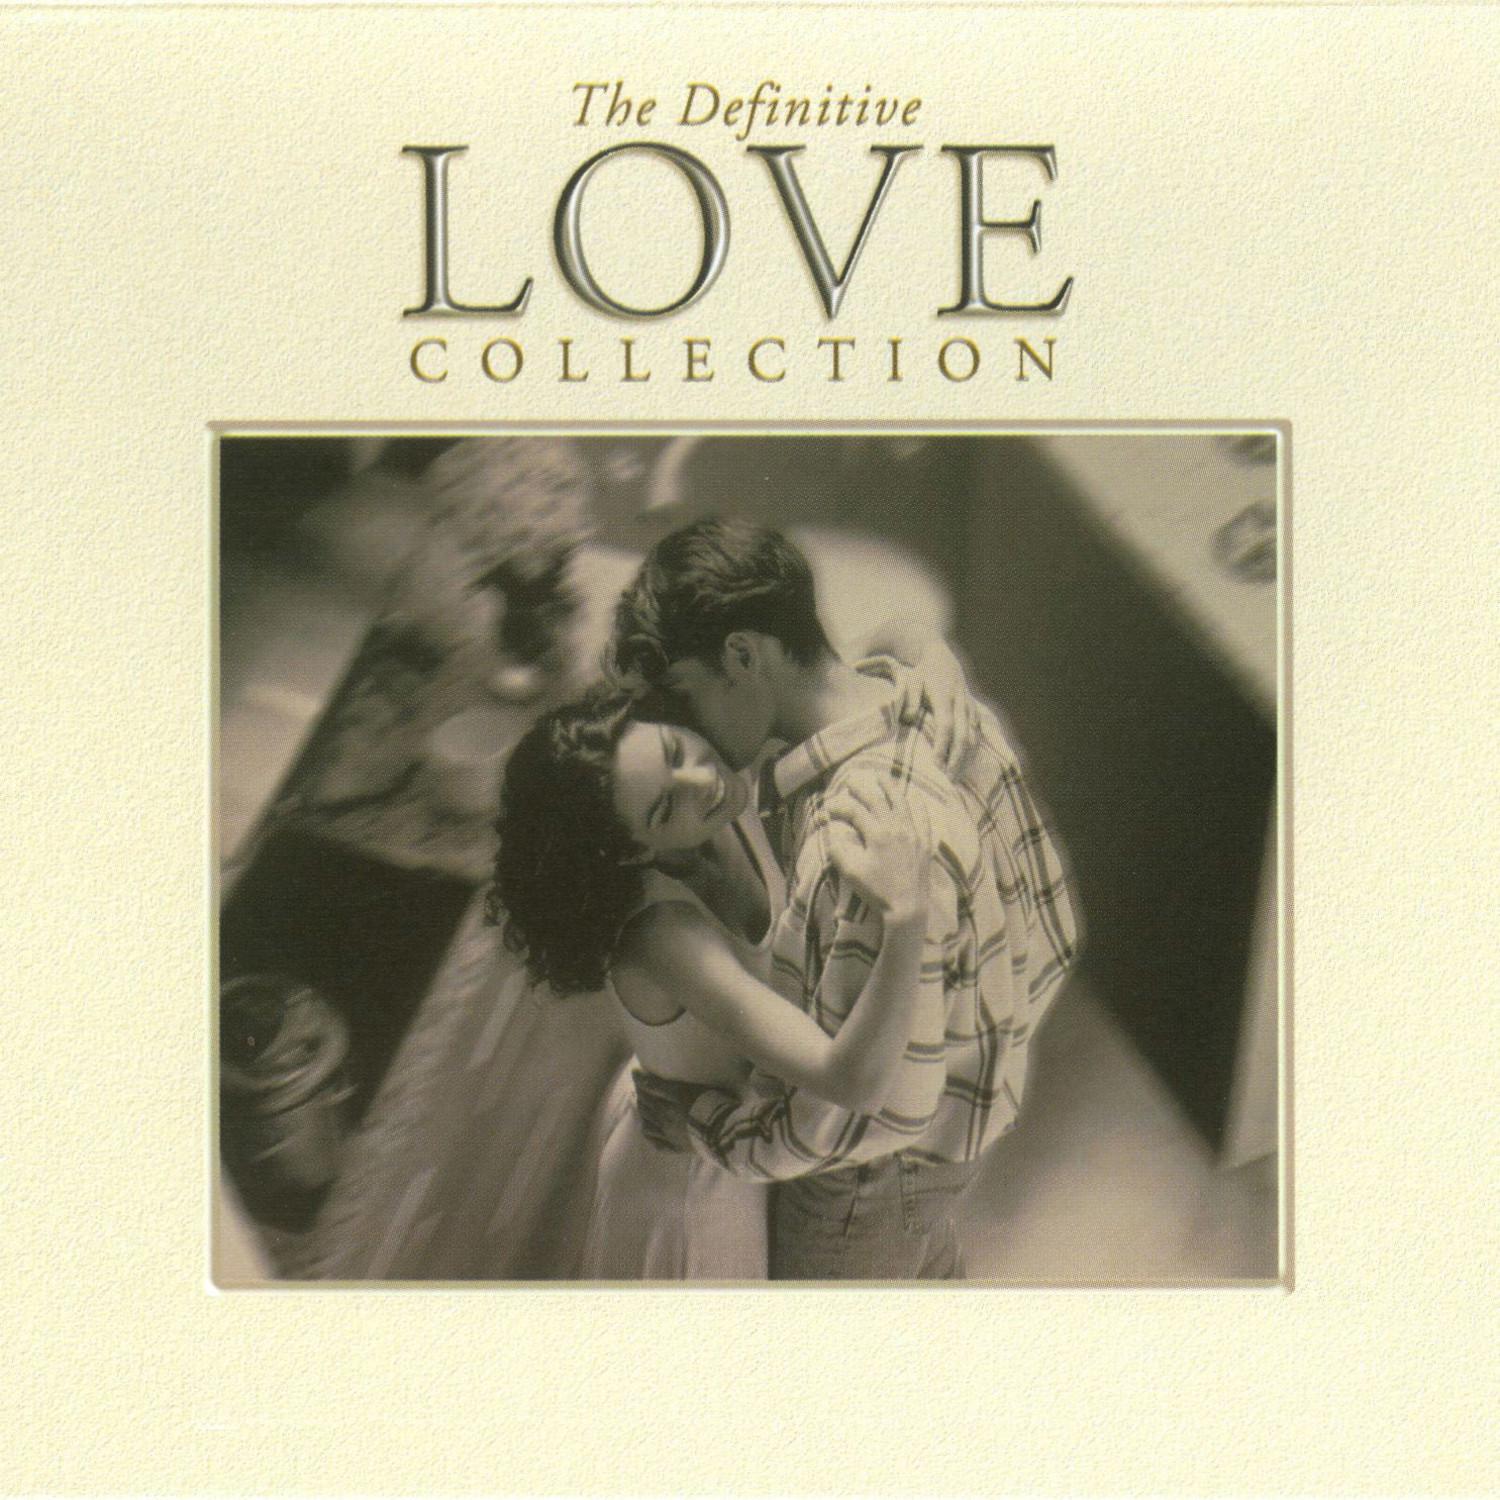 The Definitive Love Collection